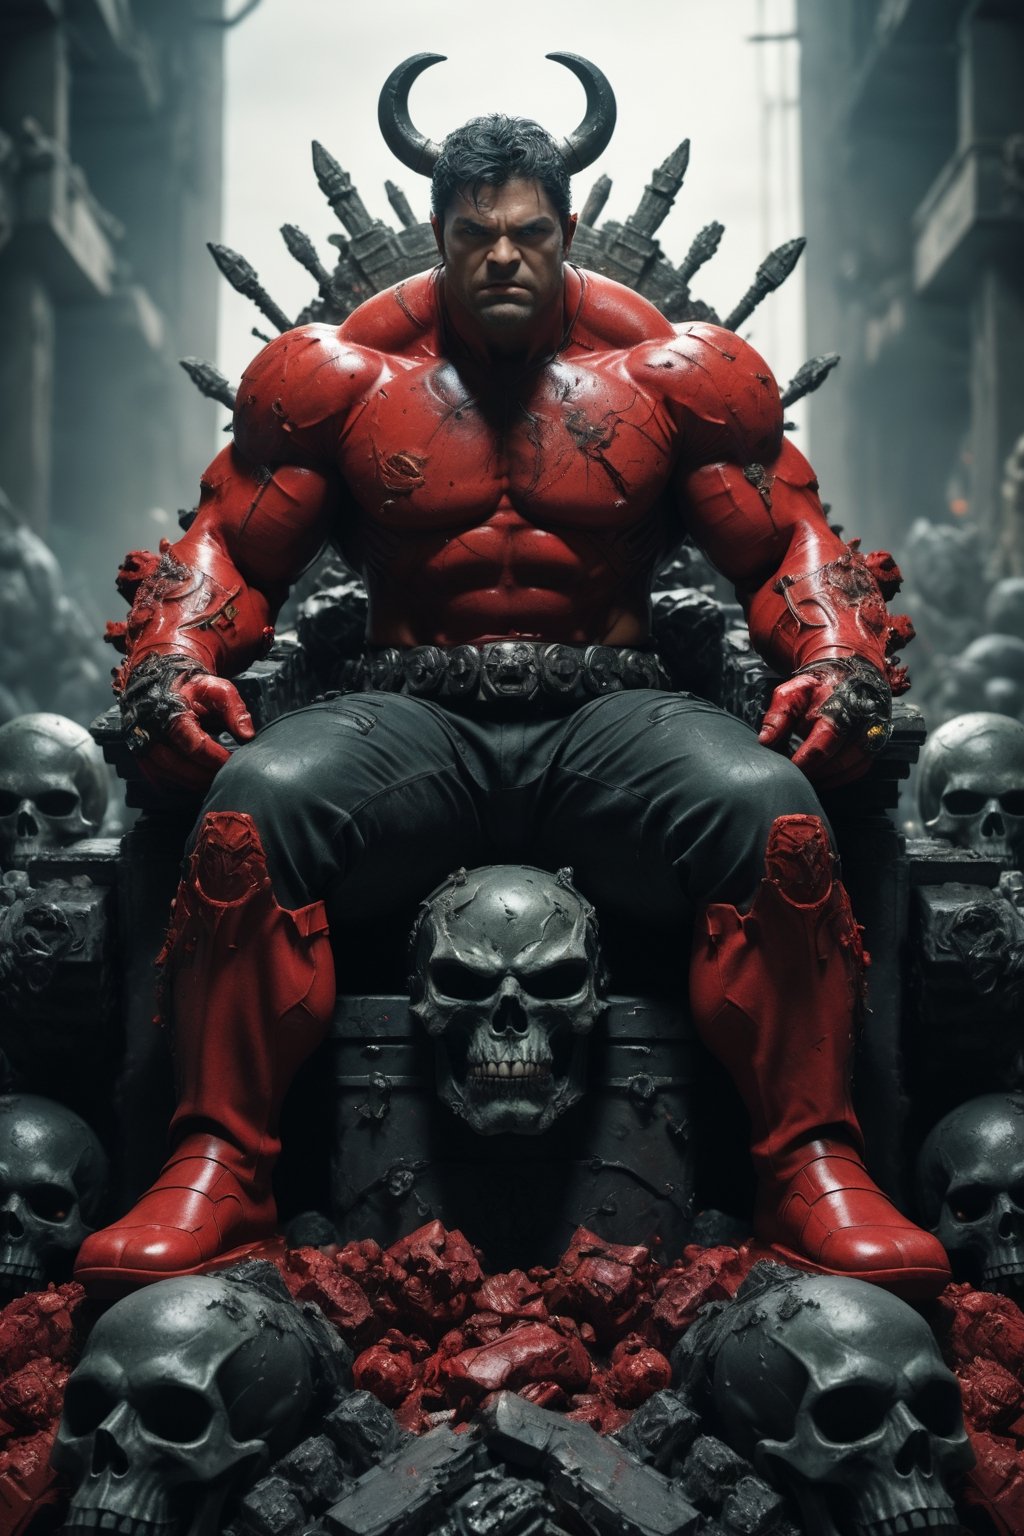 A legendary shot of hulk in a dark and gritty setting. He is sitting on a throne of skulls, surrounded by the detritus of battle. The pose is dynamic and engaging, with hulk looking directly at the viewer. The colors are vibrant and saturated, with a strong emphasis on red and black. The level of detail is incredible, with every skull and every piece of armor rendered in stunning realism. The image has been post-processed to add even more detail and atmosphere. The overall effect is one of ultra-realism and cinematic quality.

